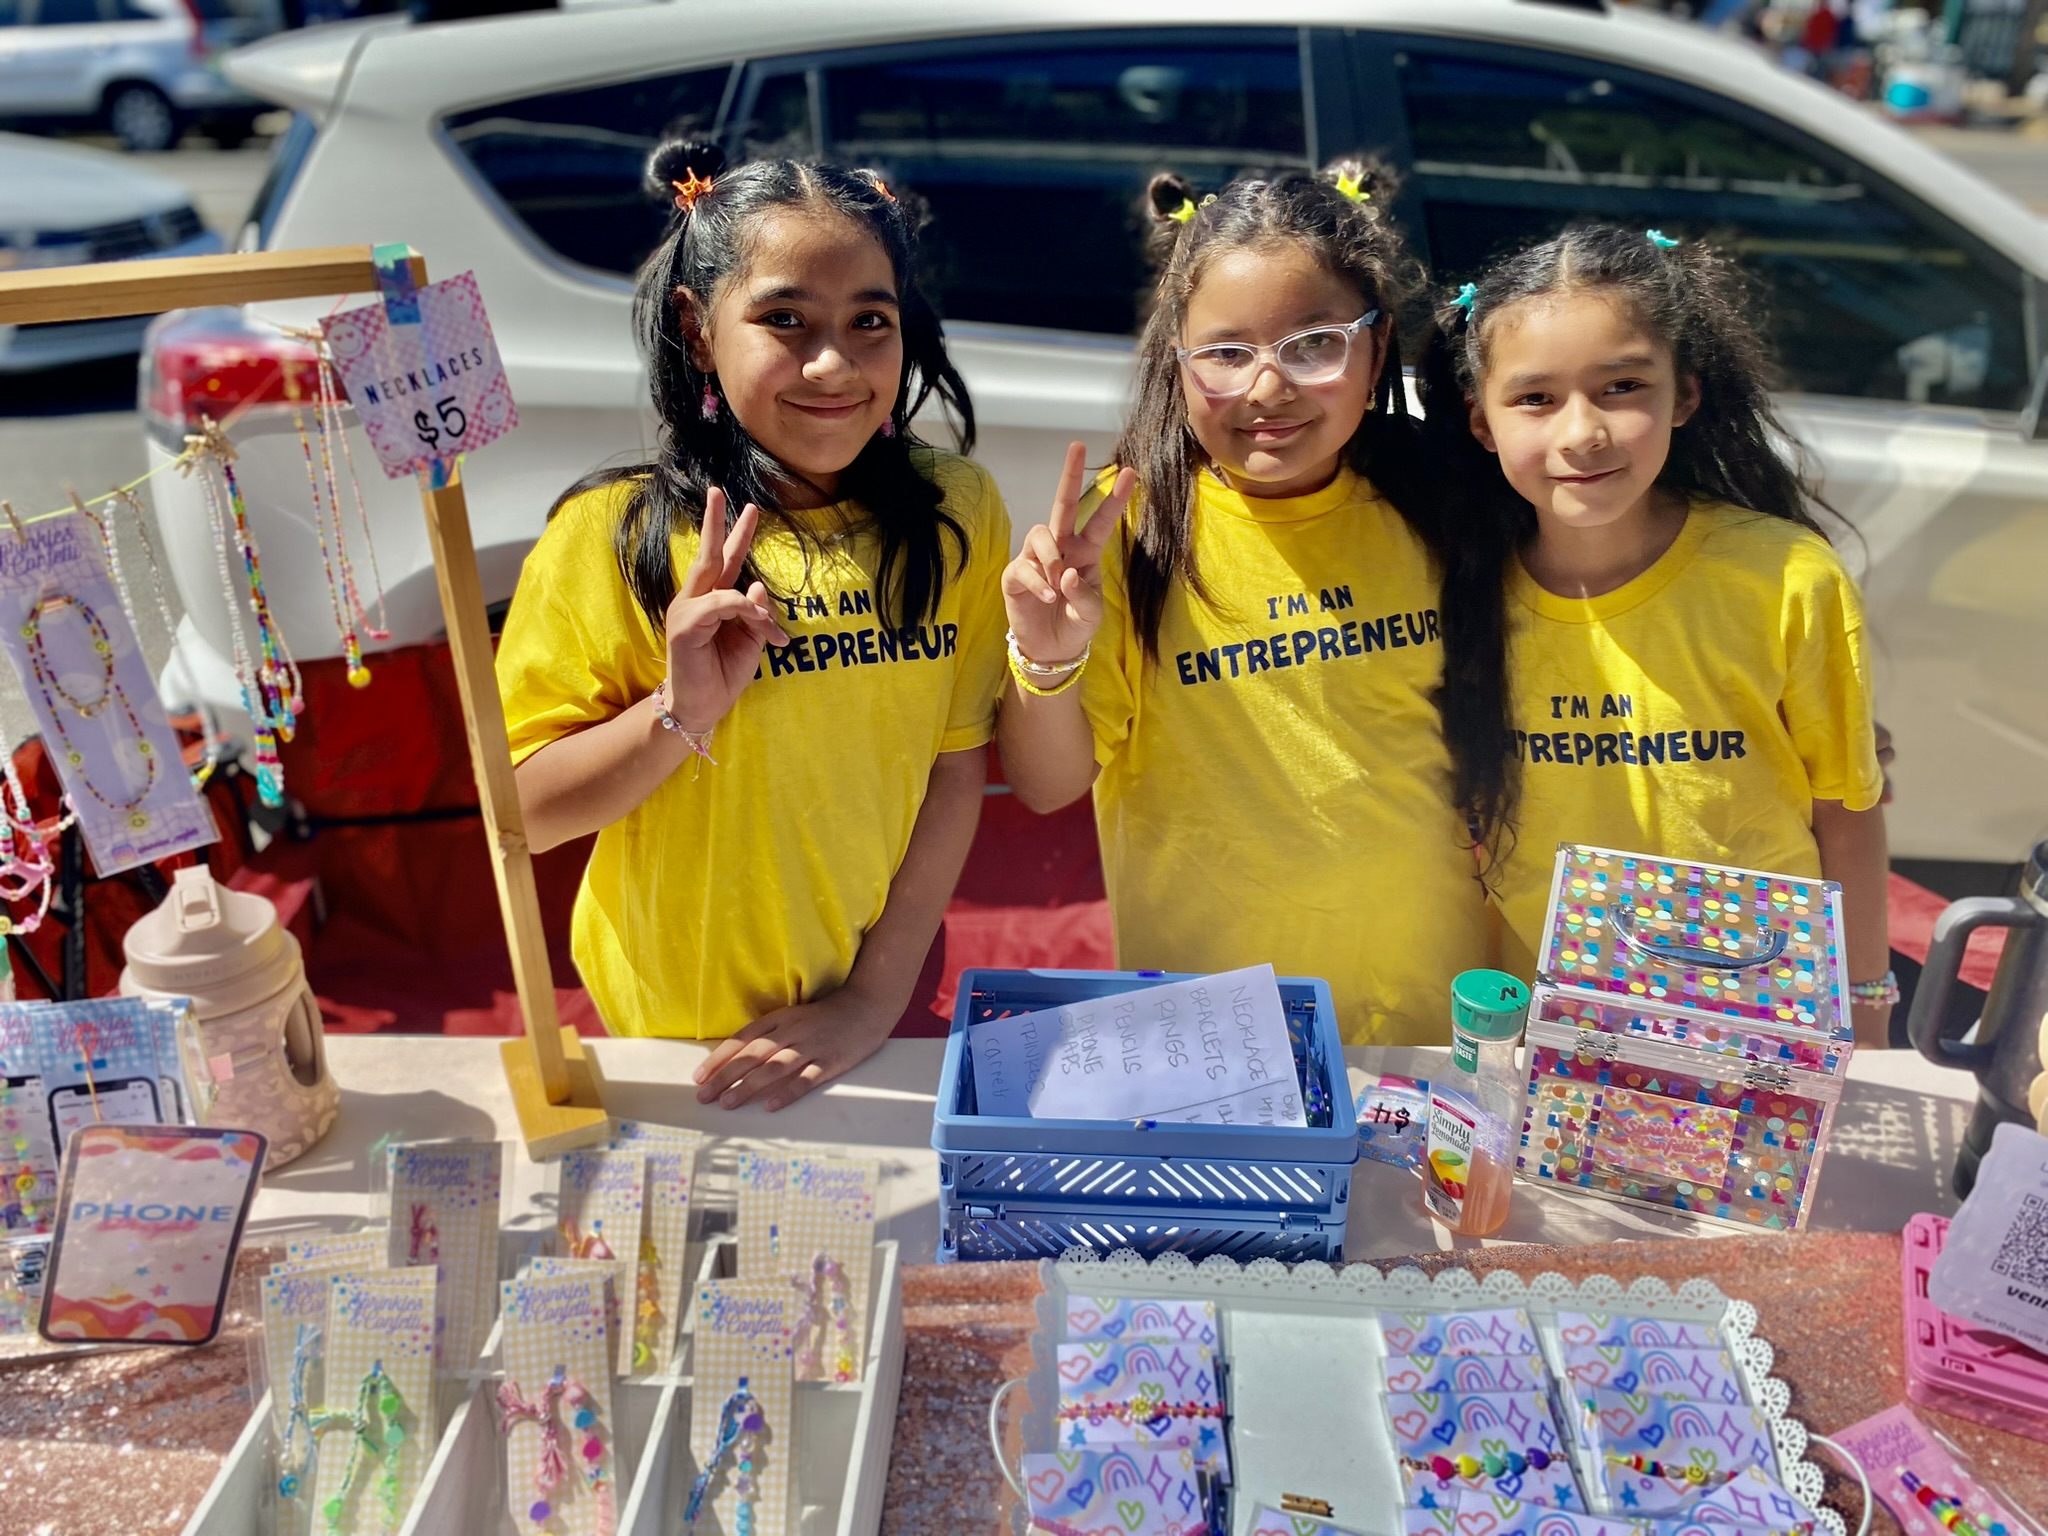 We were wowed by the creativity and enthusiasm of these three young entrepreneurs in Tucson, Arizona this Fall! 